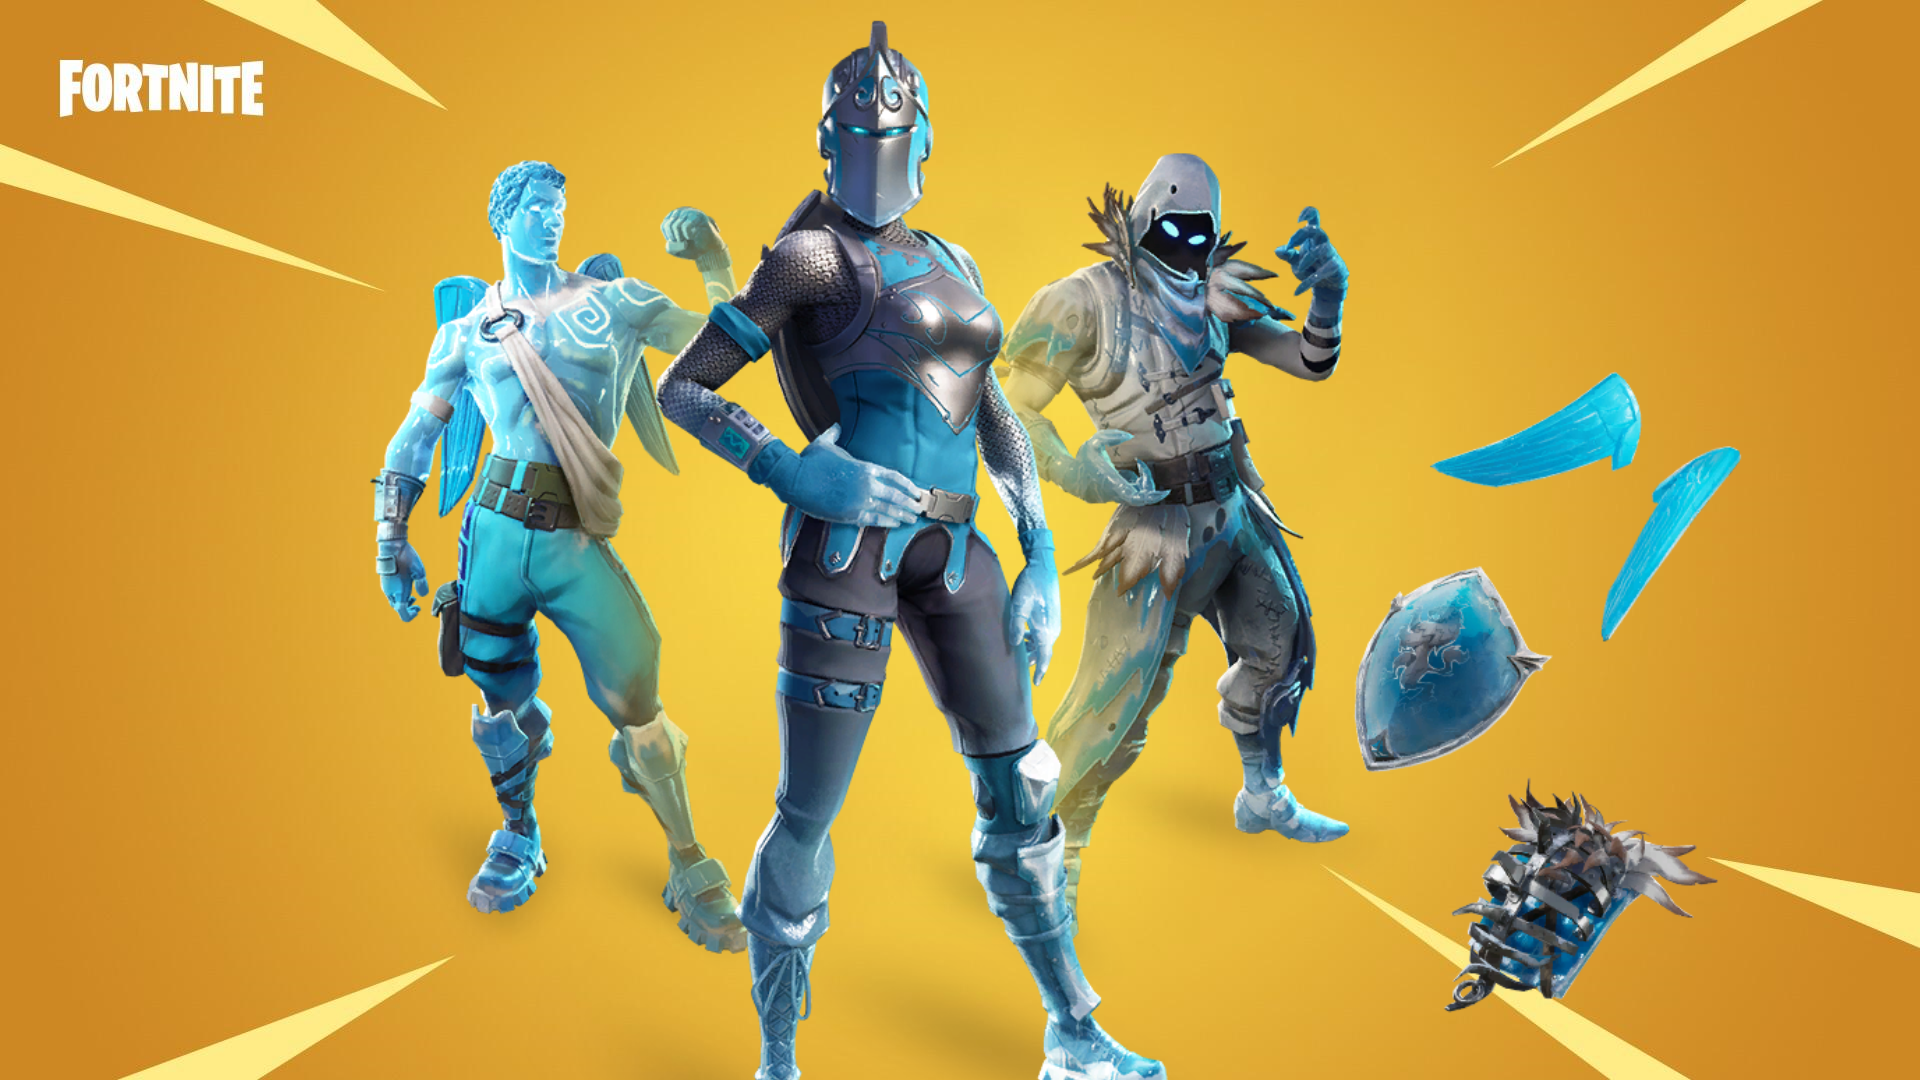 the frozen legends bundle might be on sale for real money only leaks show - winter knight fortnite